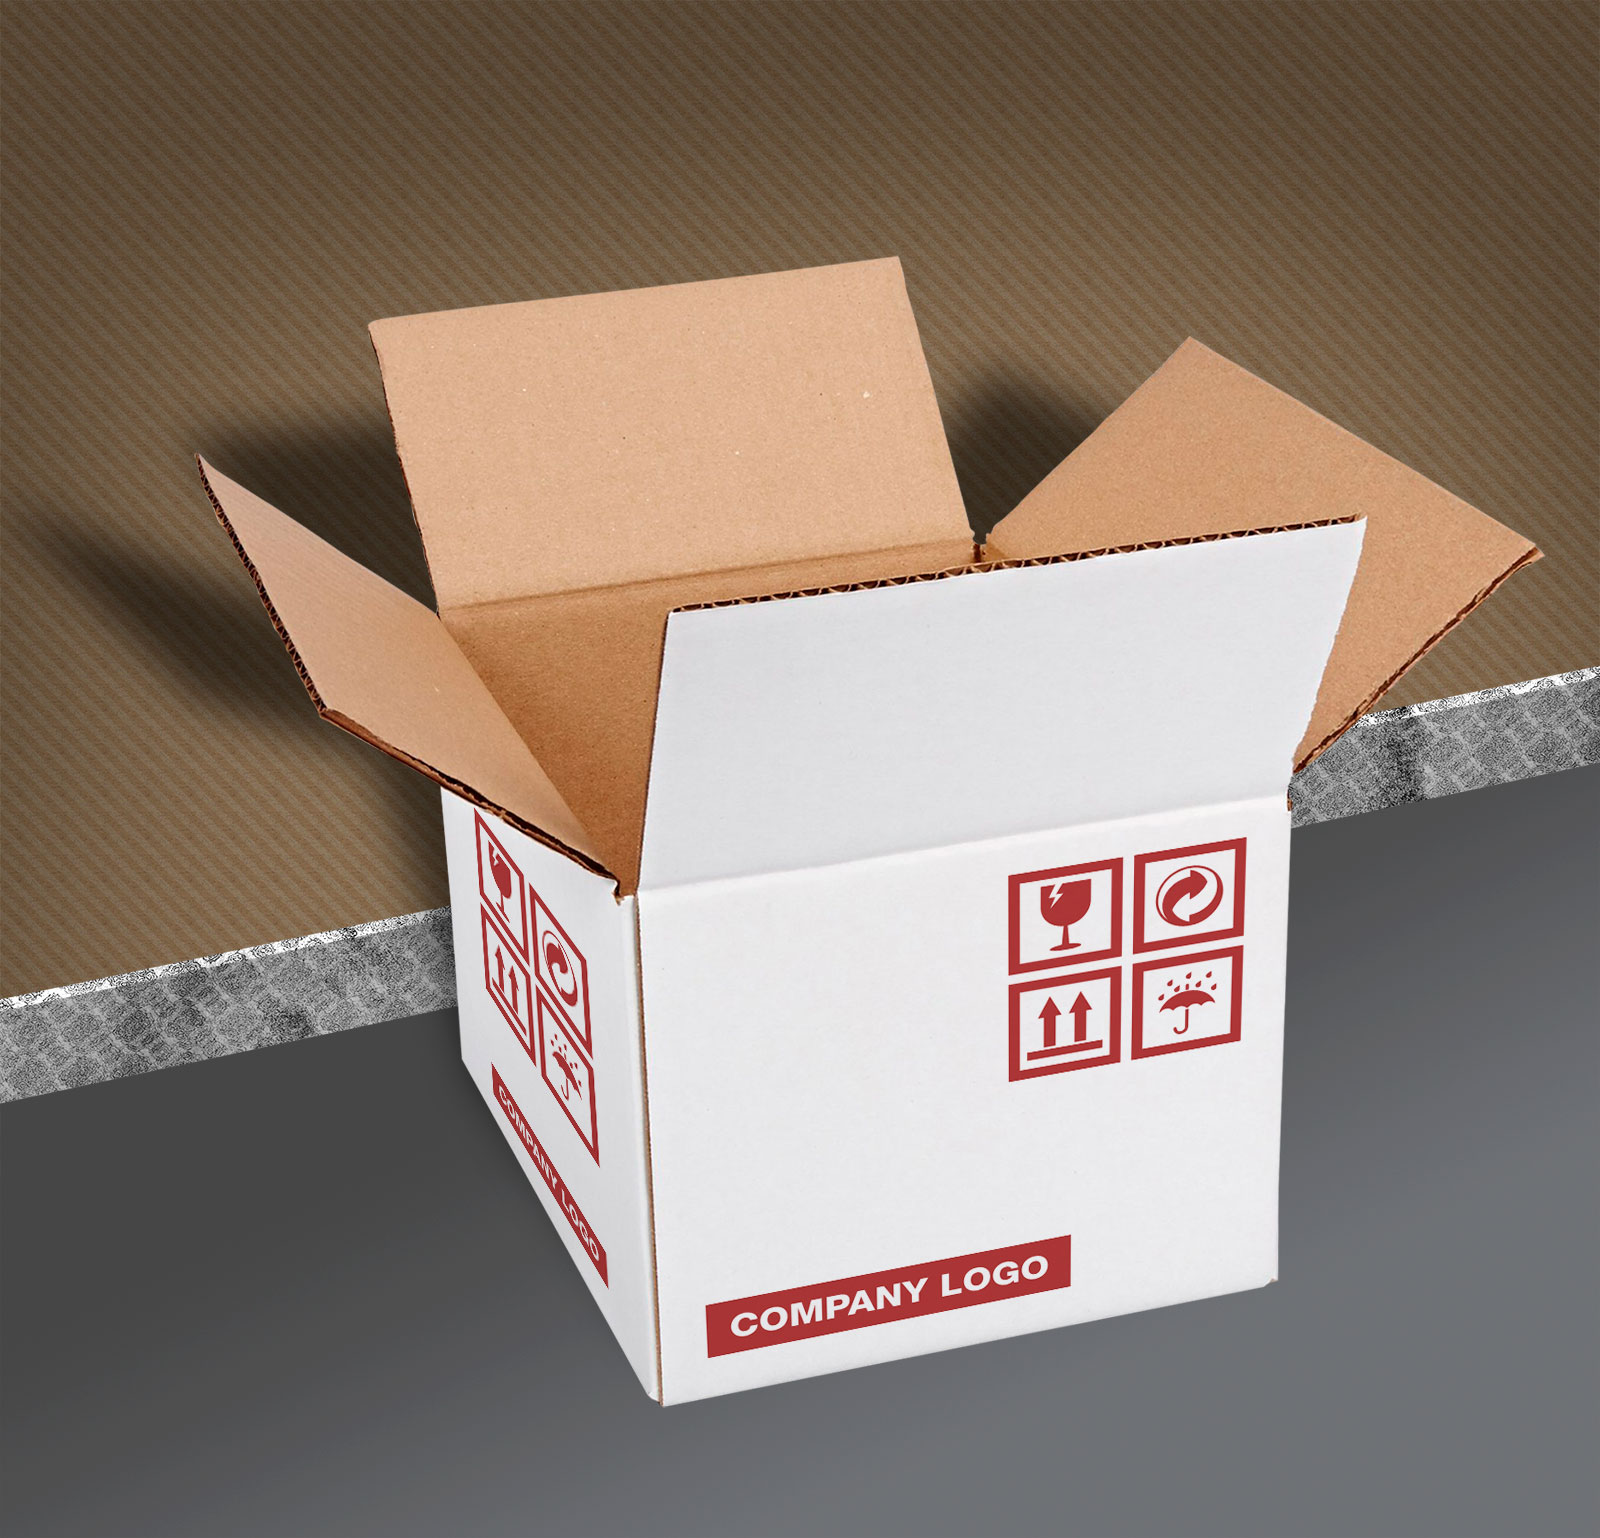 What Kind Of Boxes Am I Able To Get For My Packaging Needs?